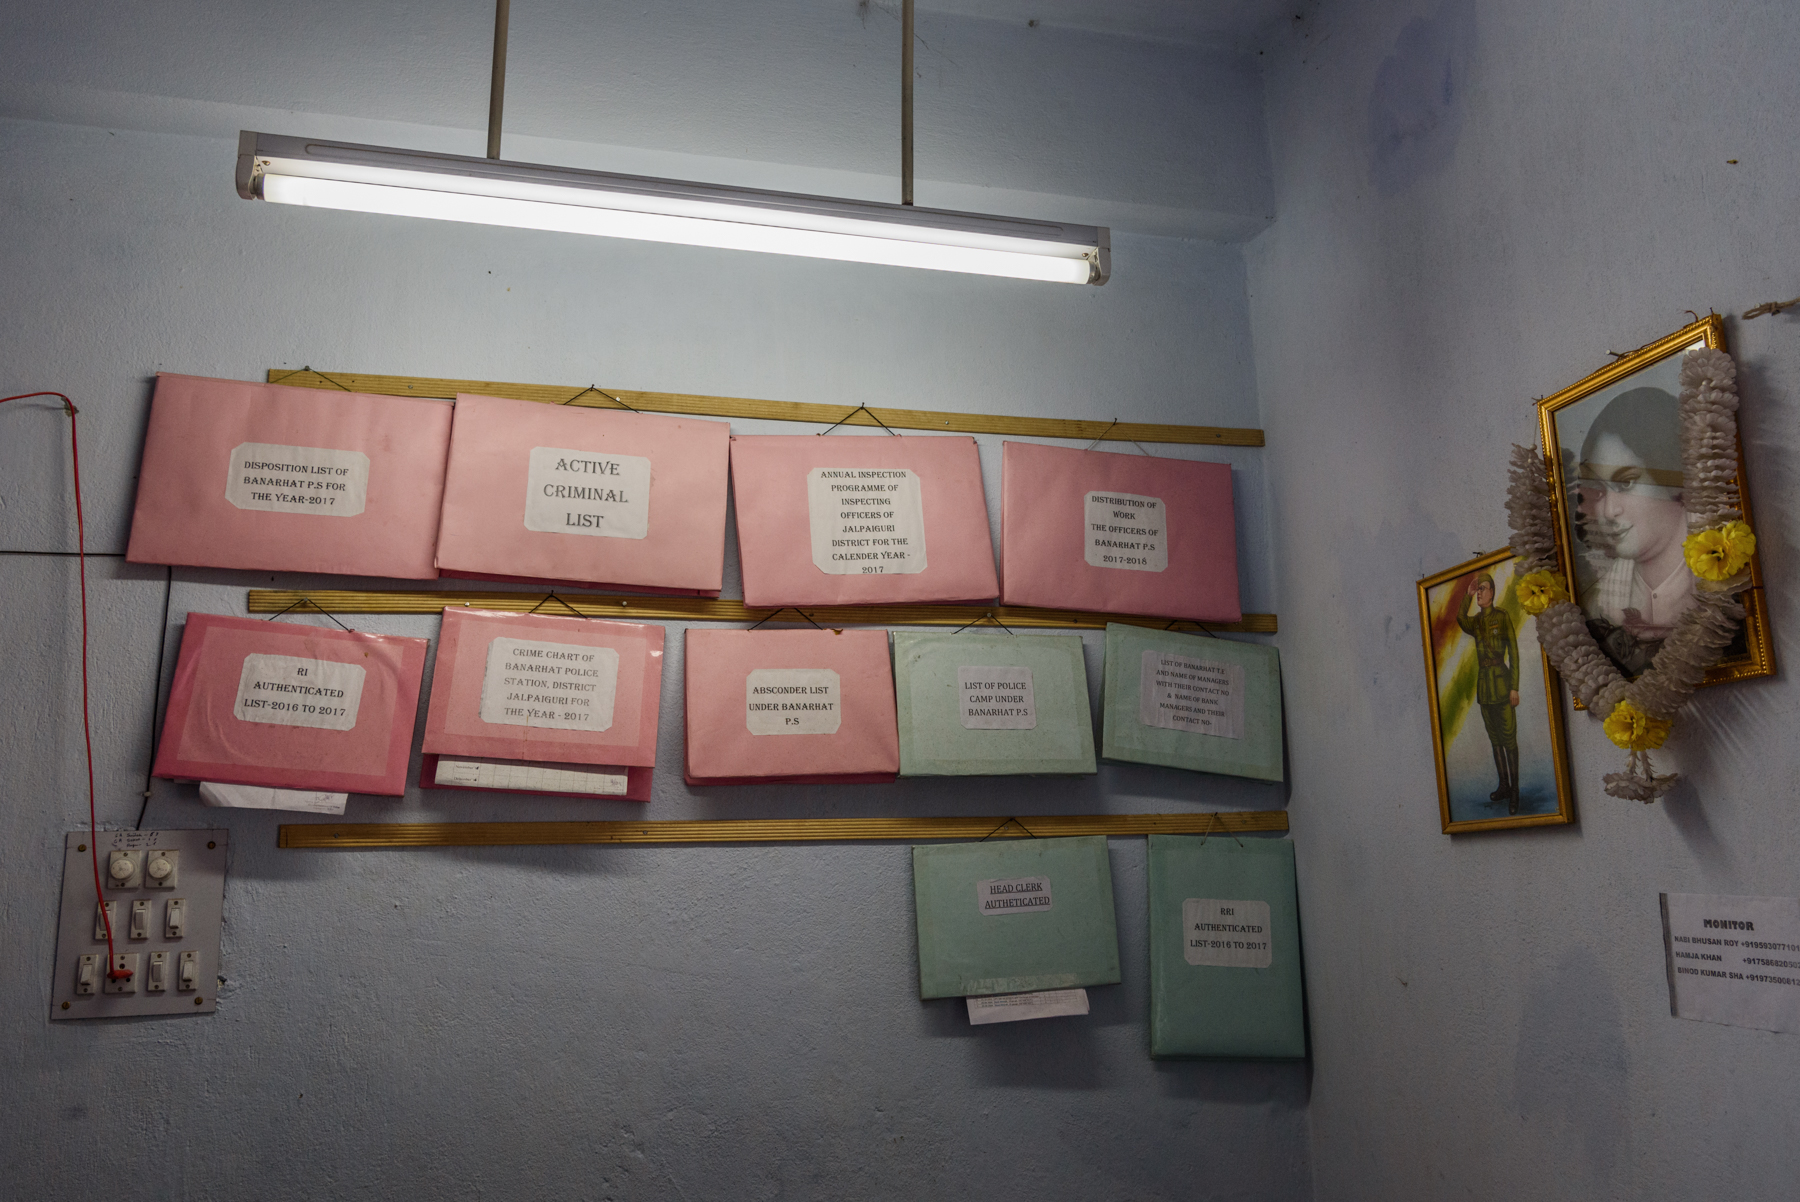  Police record files hang on the walls of Banarhar Police station, West Bengal, India. This region is notorious for trafficking and many girls have been missing from the area. 